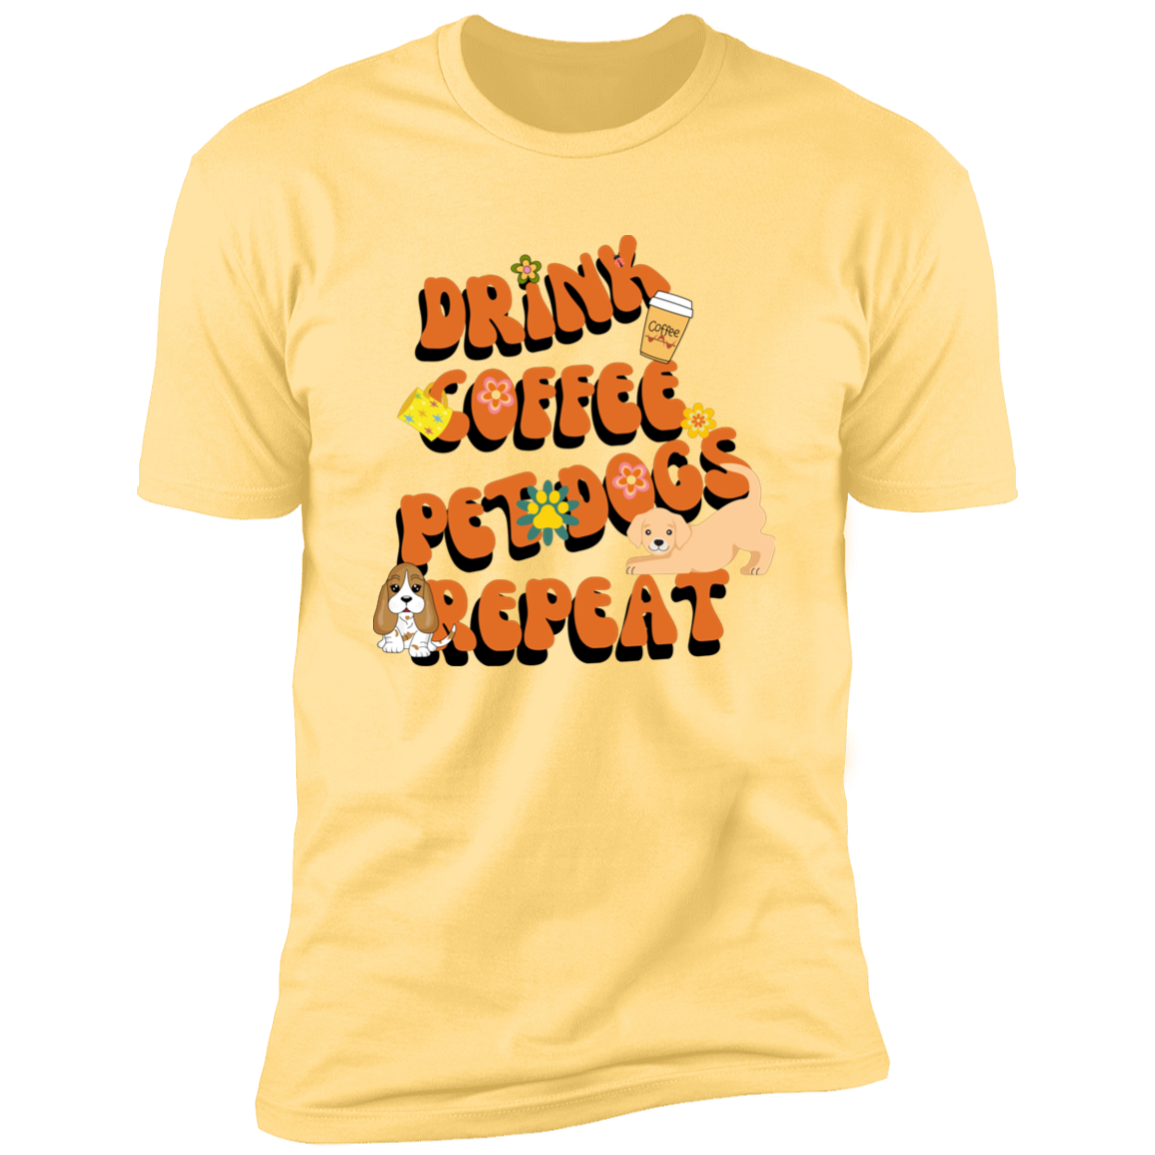 Drink Coffee Pet dogs repeat dog  Shirt, funny dog shirt for humans, dog mom and dog dad shirt, in banana cream\